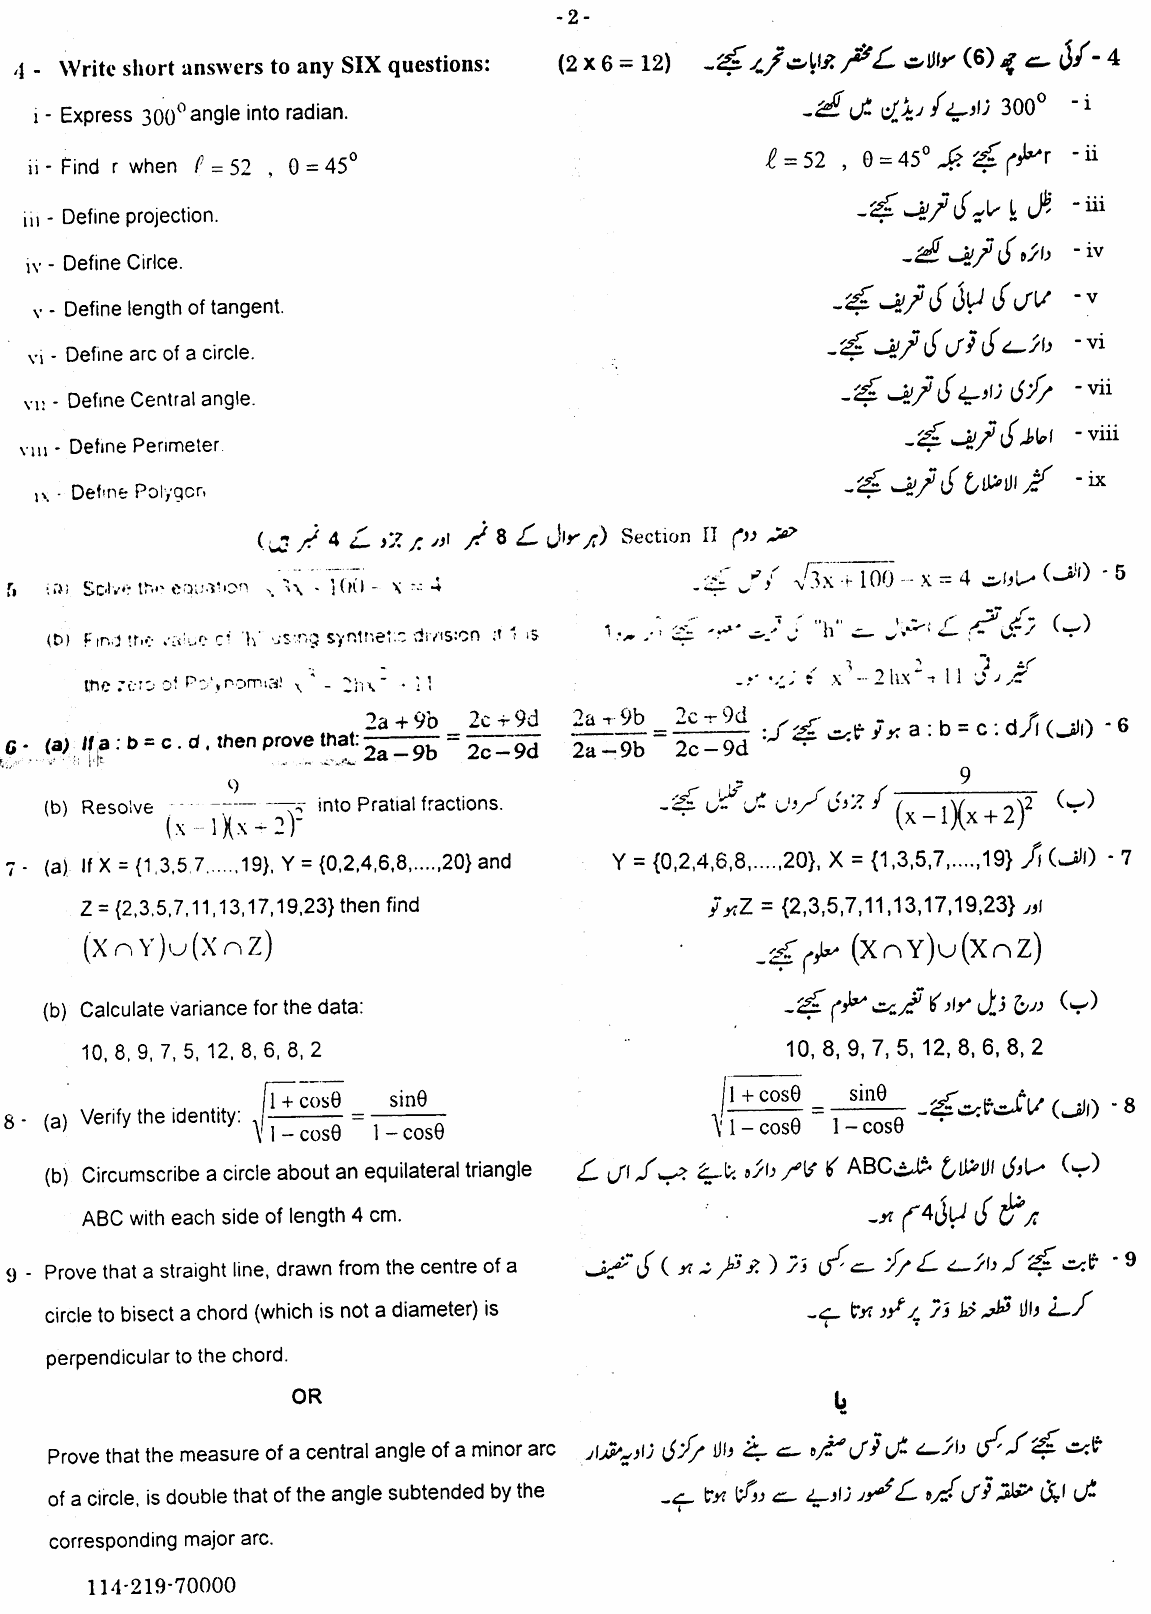 10th Class Mathematics Paper 2019 Gujranwala Board Subjective Group 2